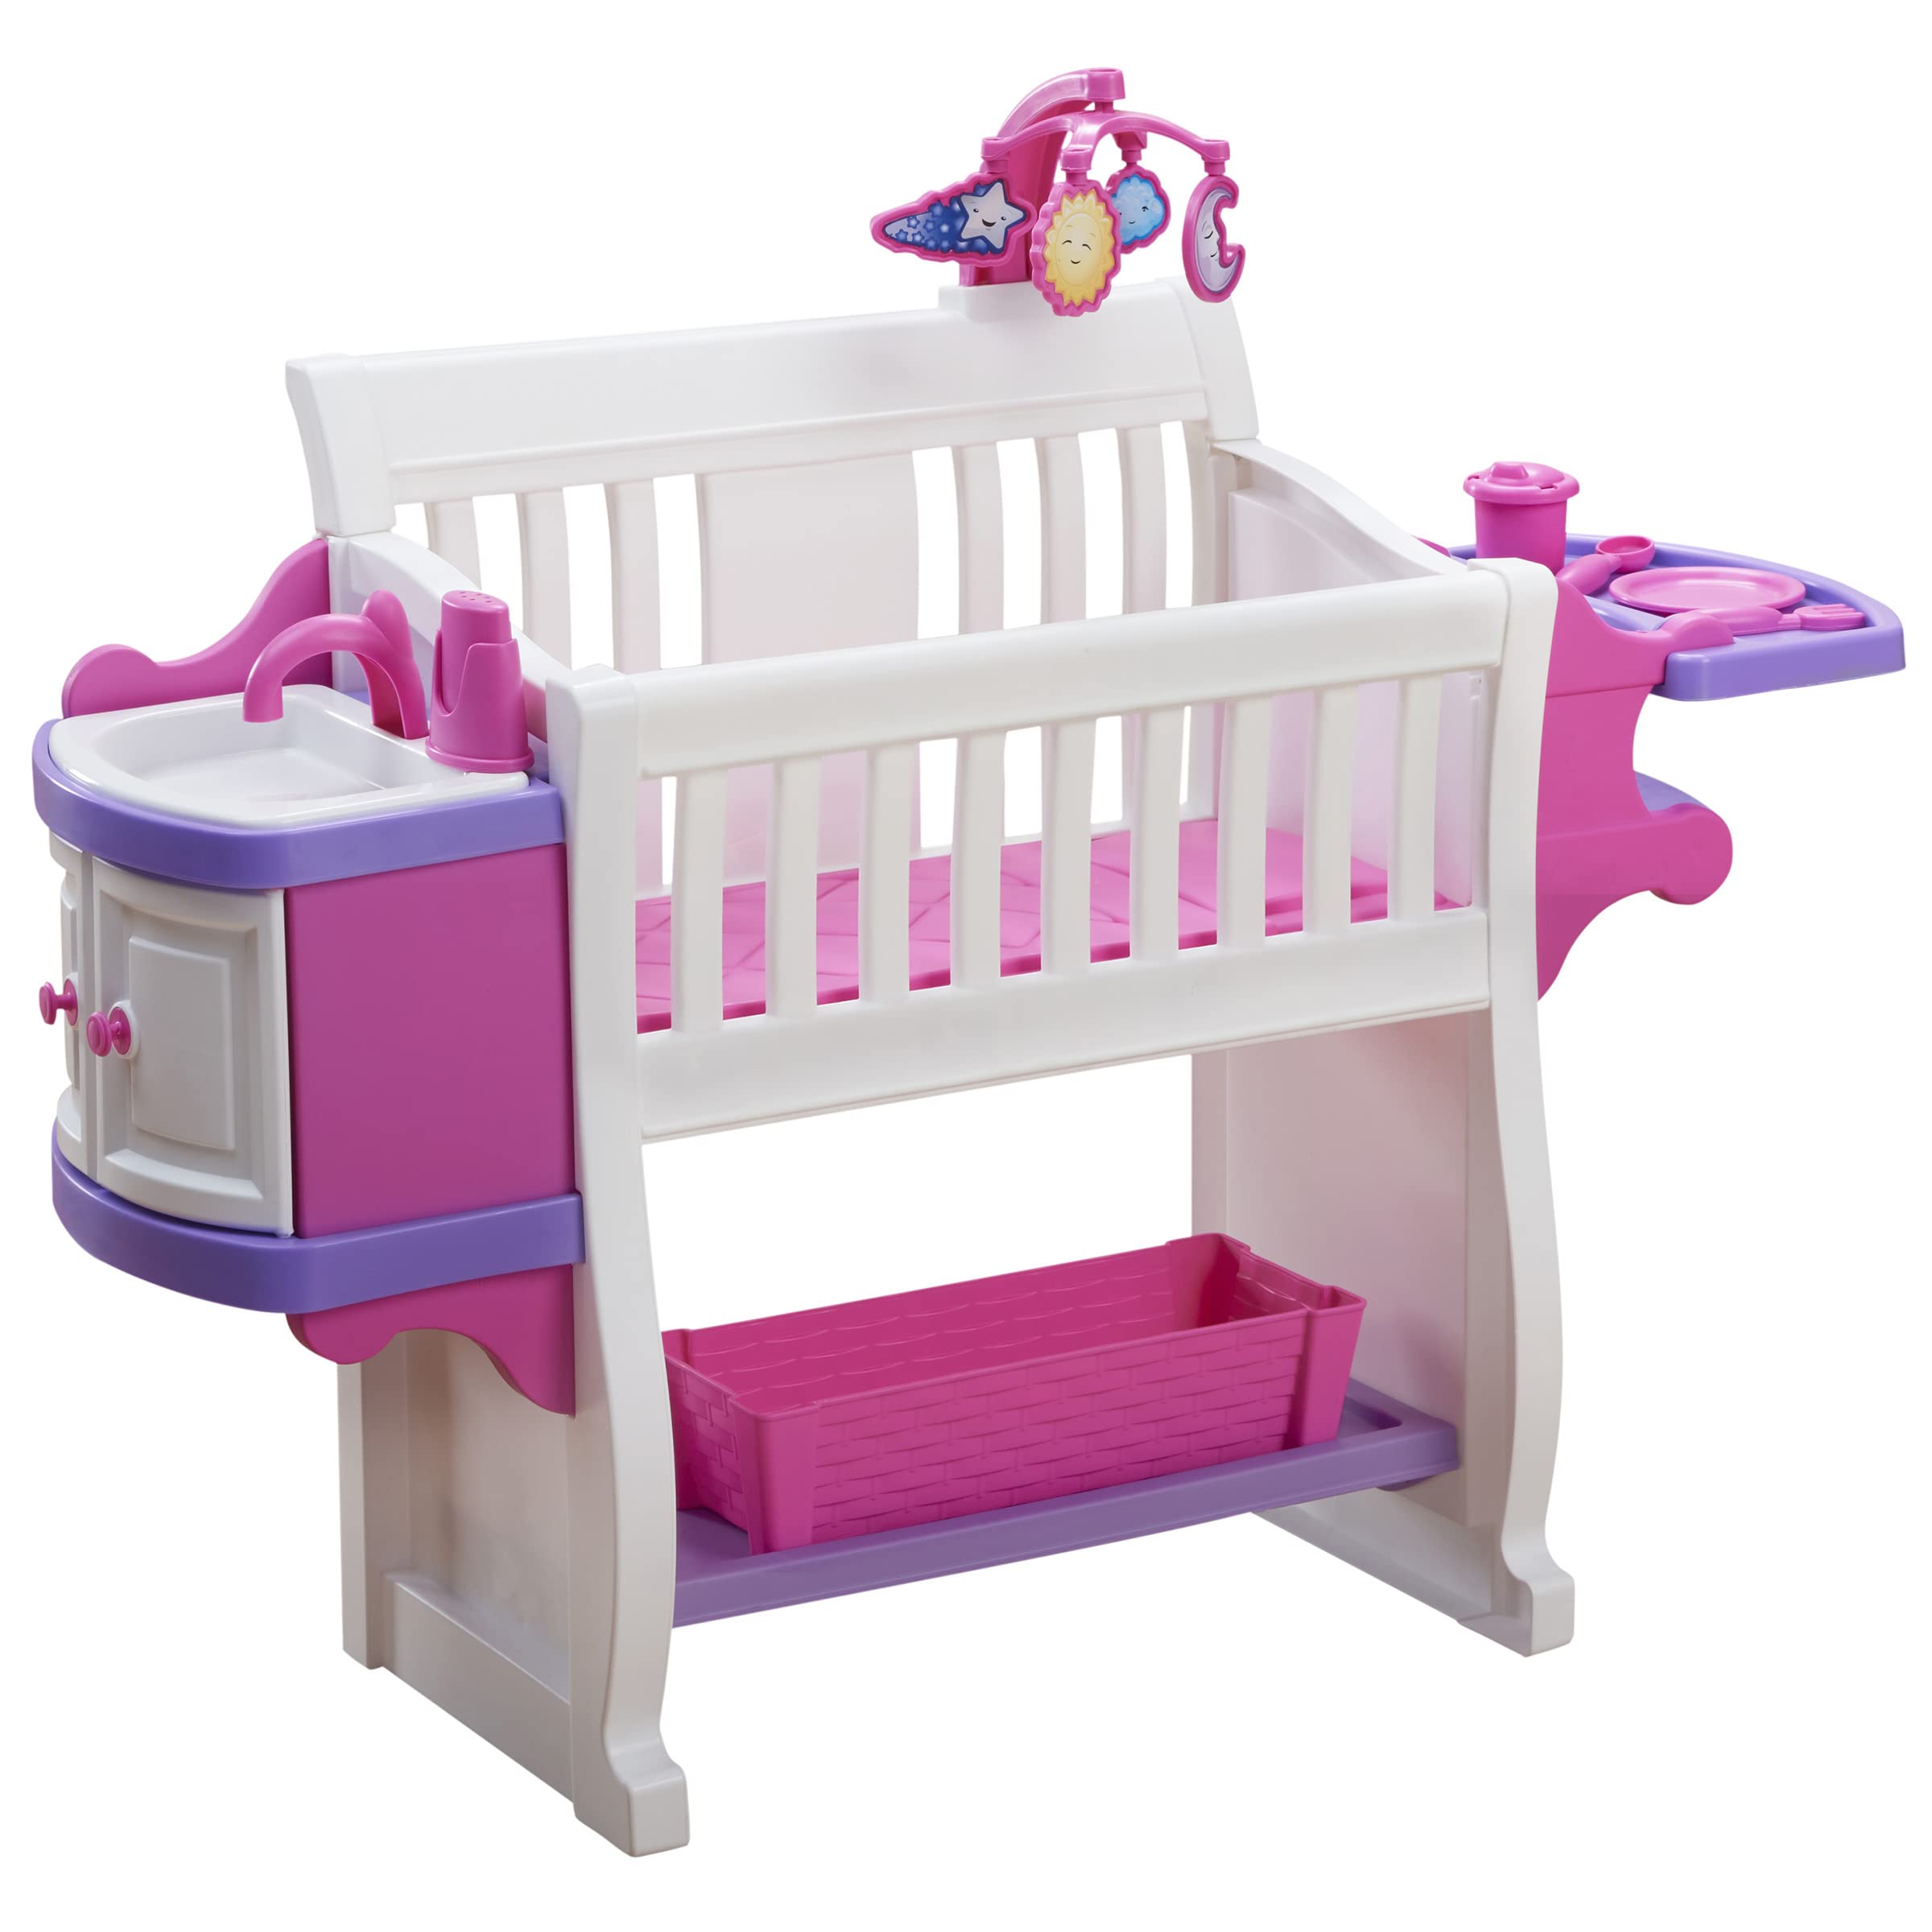 American Plastic Toys Kids’ My Very Own Nursery Baby Doll Playset, Furniture, Crib, Feeding Station, Learn to Nurture and Care, Durable and BPA-Free Plastic, for Children Ages 2+